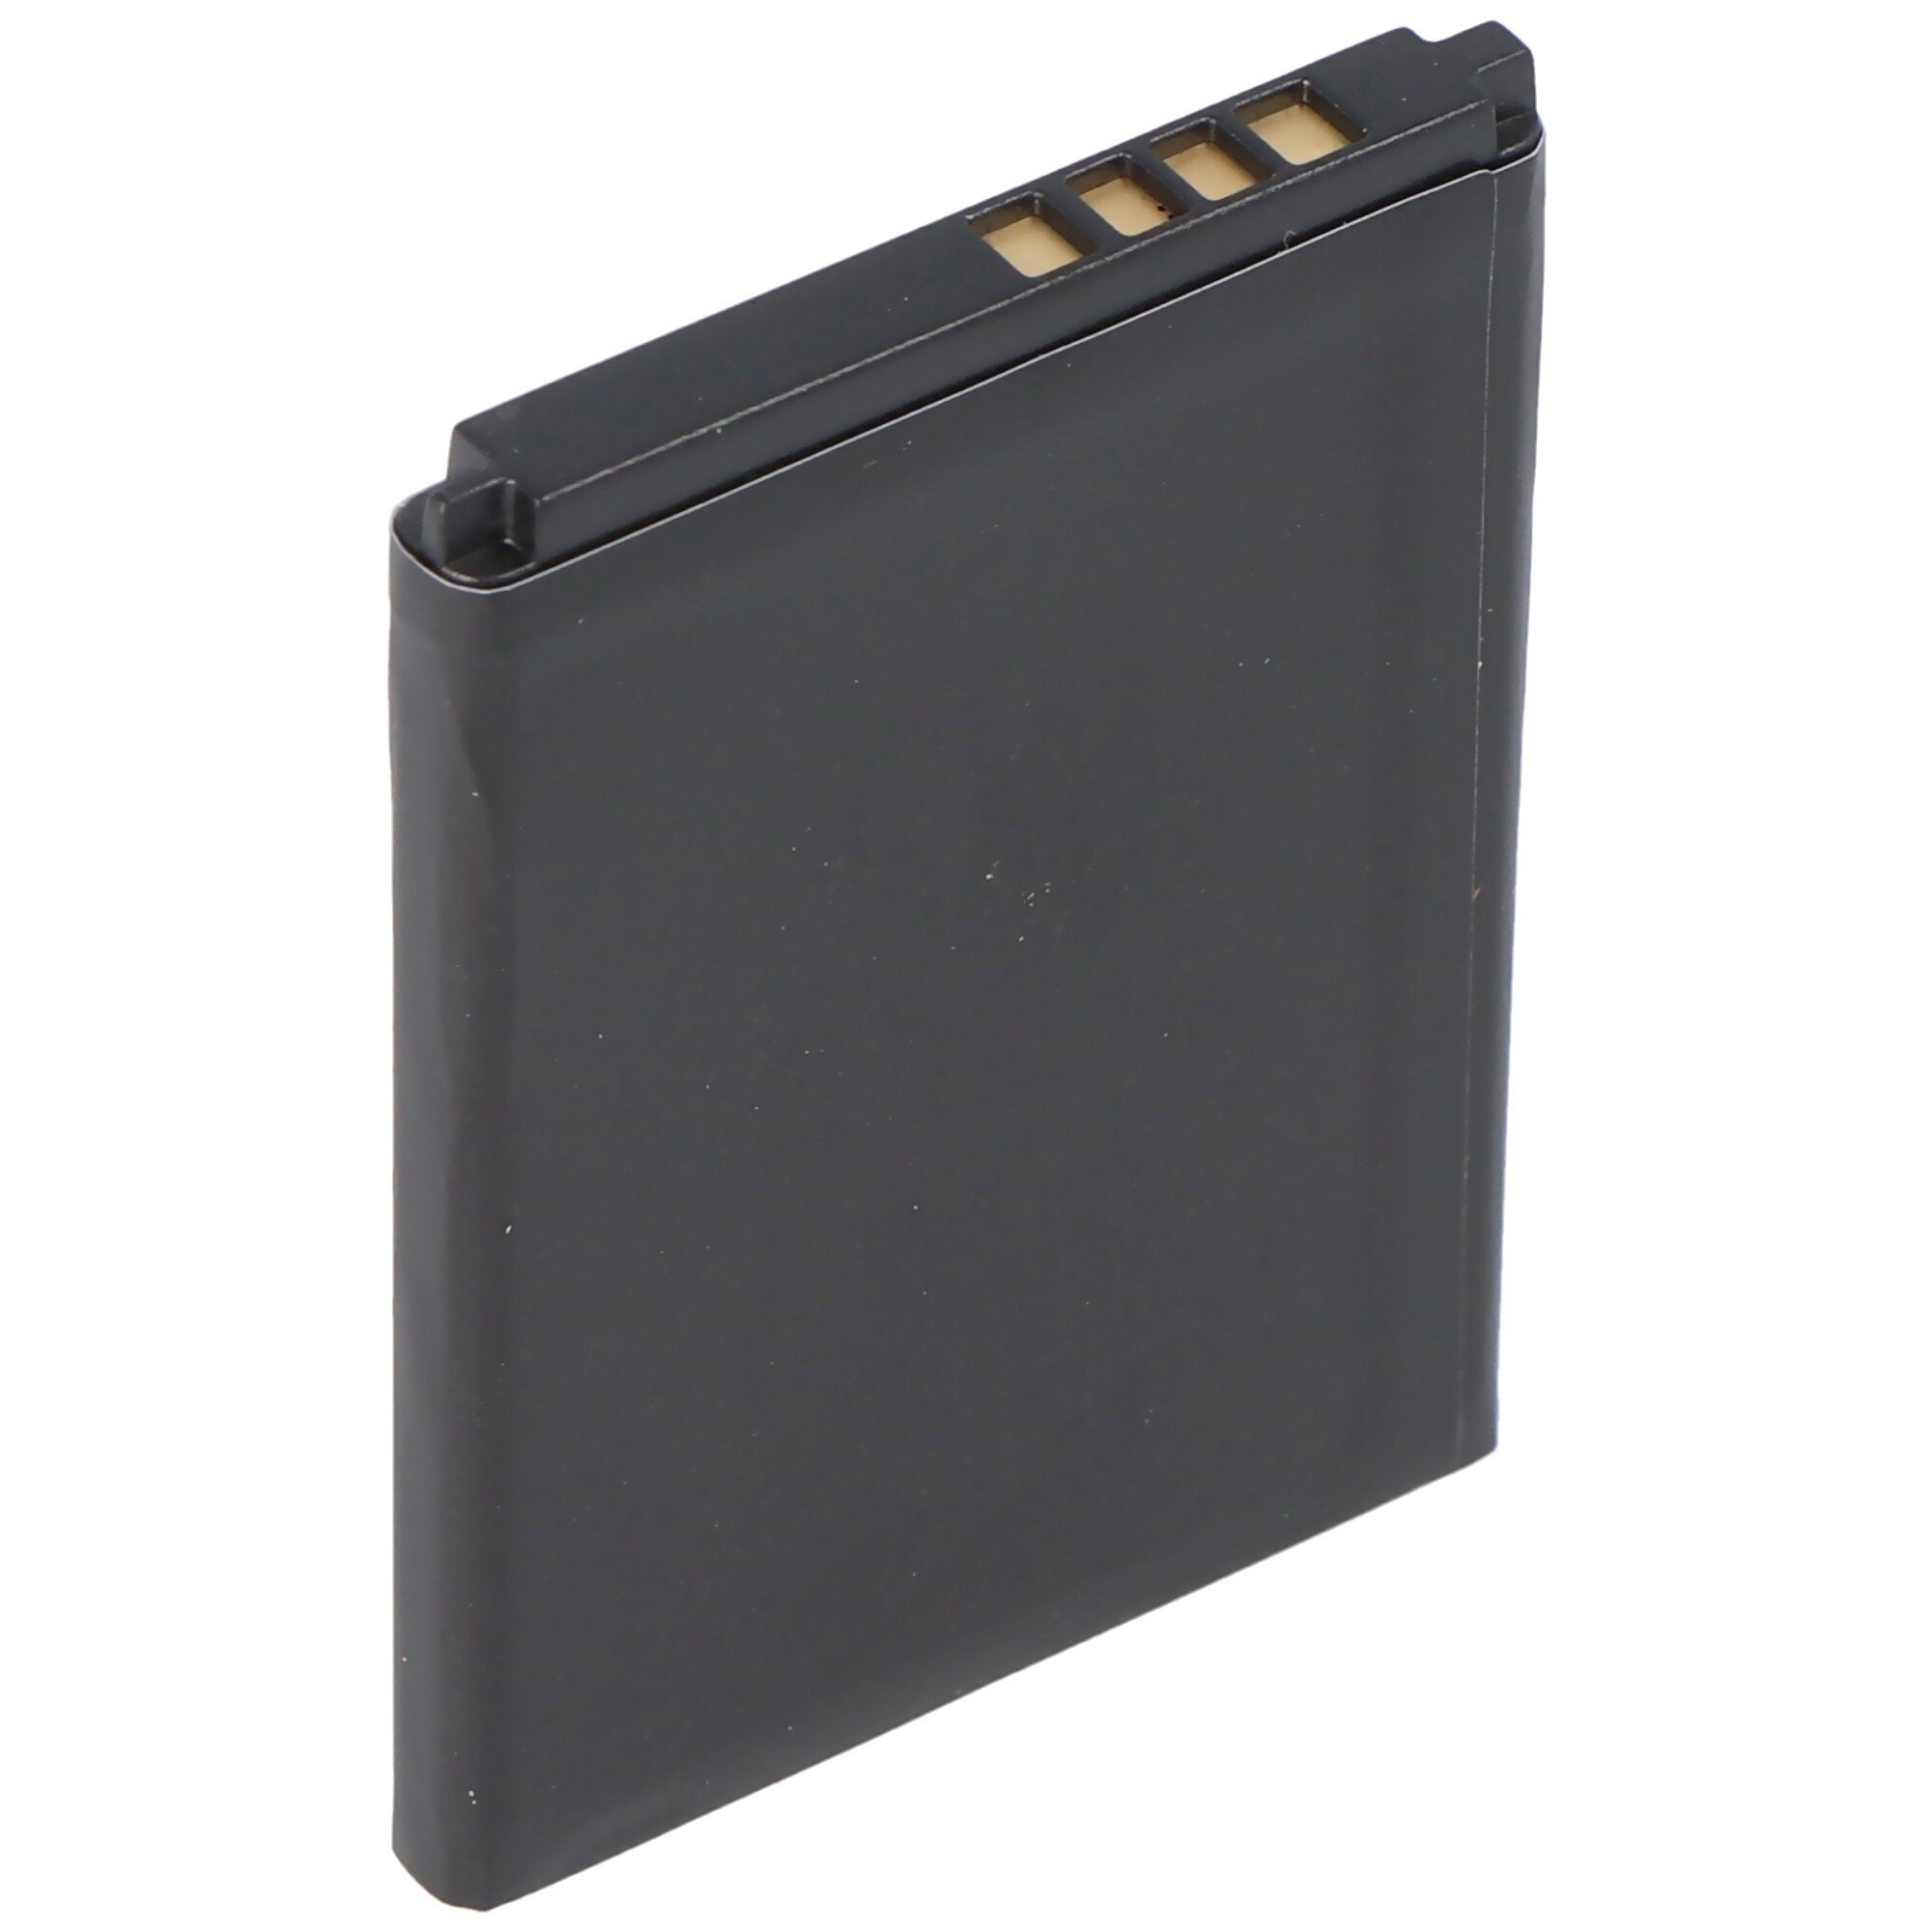 Battery suitable for the Alcatel CAB0400000C1 battery One Touch 1040X, One Touch 1042D, OT 1040X, OT